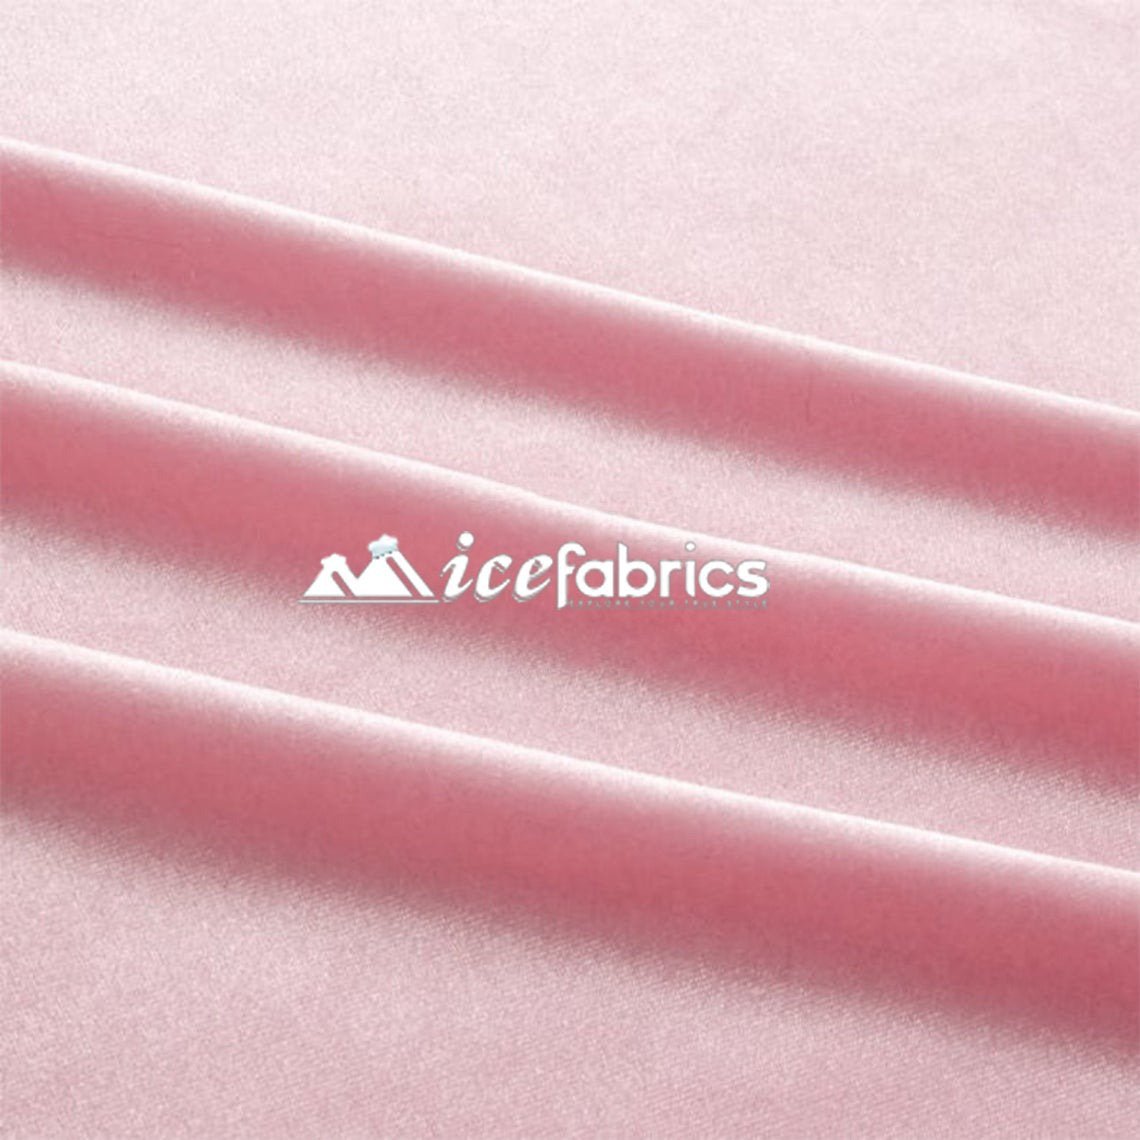 Hight Quality Stretch Velvet Fabric By The Roll (20 yards) Wholesale FabricVelvet FabricICE FABRICSICE FABRICSPinkBy The Roll (60" Wide)Hight Quality Stretch Velvet Fabric By The Roll (20 yards) Wholesale Fabric ICE FABRICS Pink